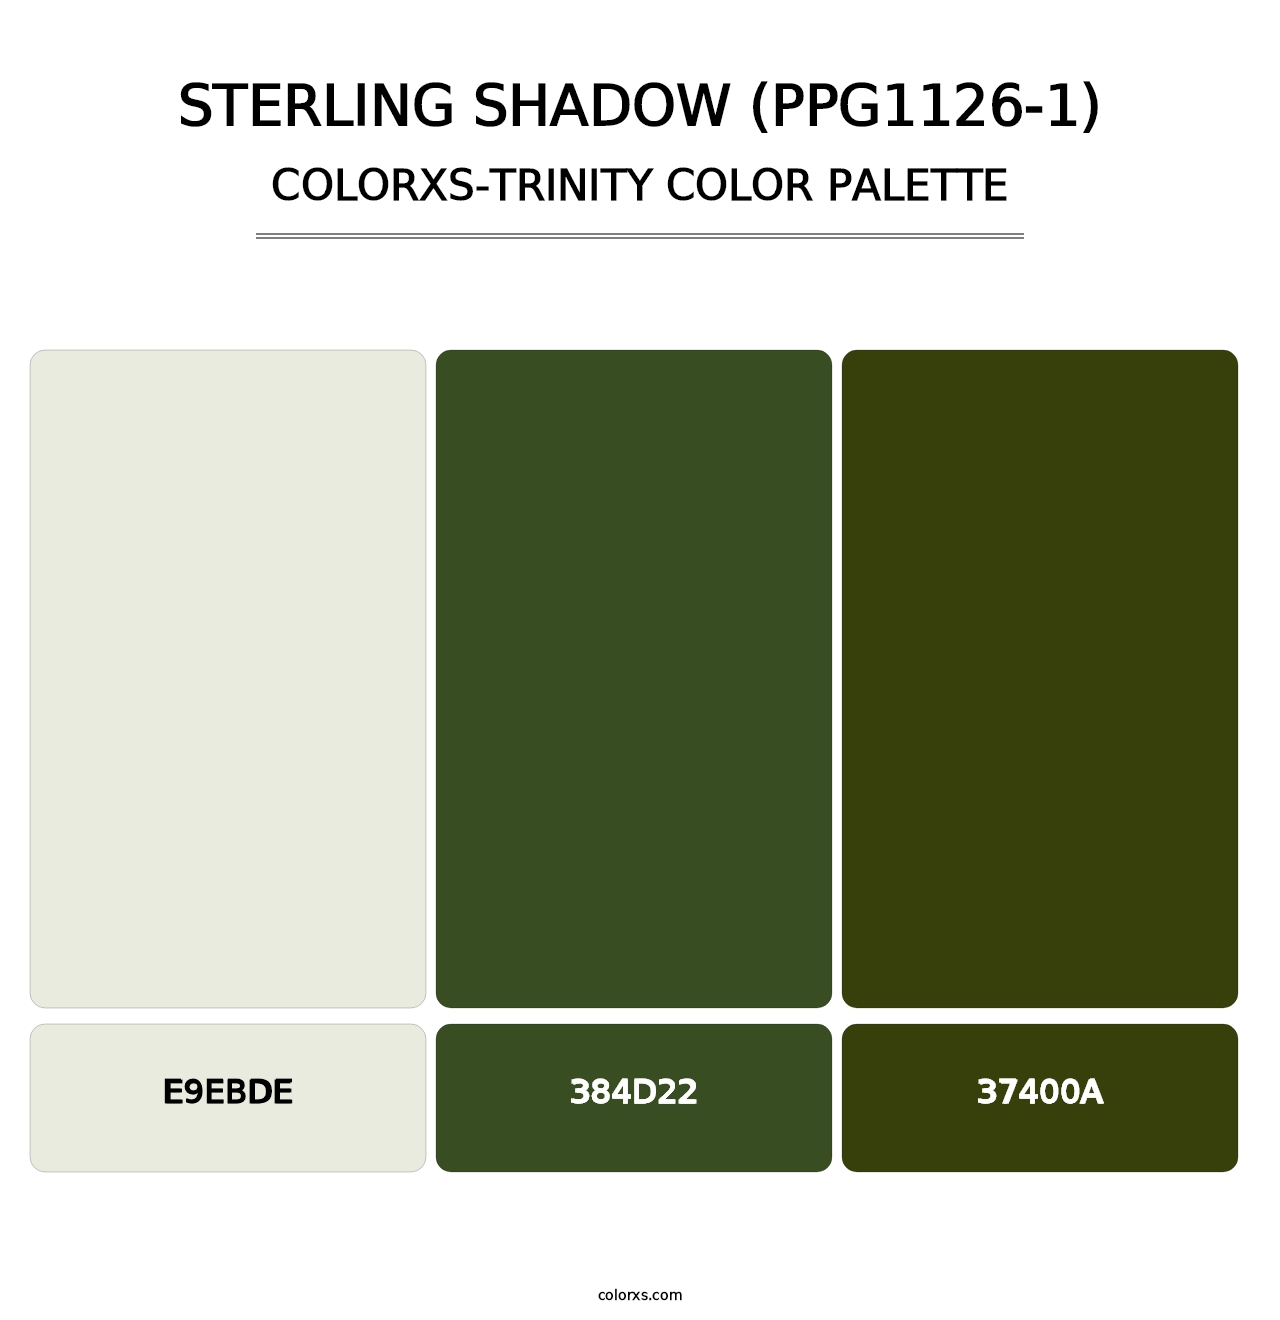 Sterling Shadow (PPG1126-1) - Colorxs Trinity Palette